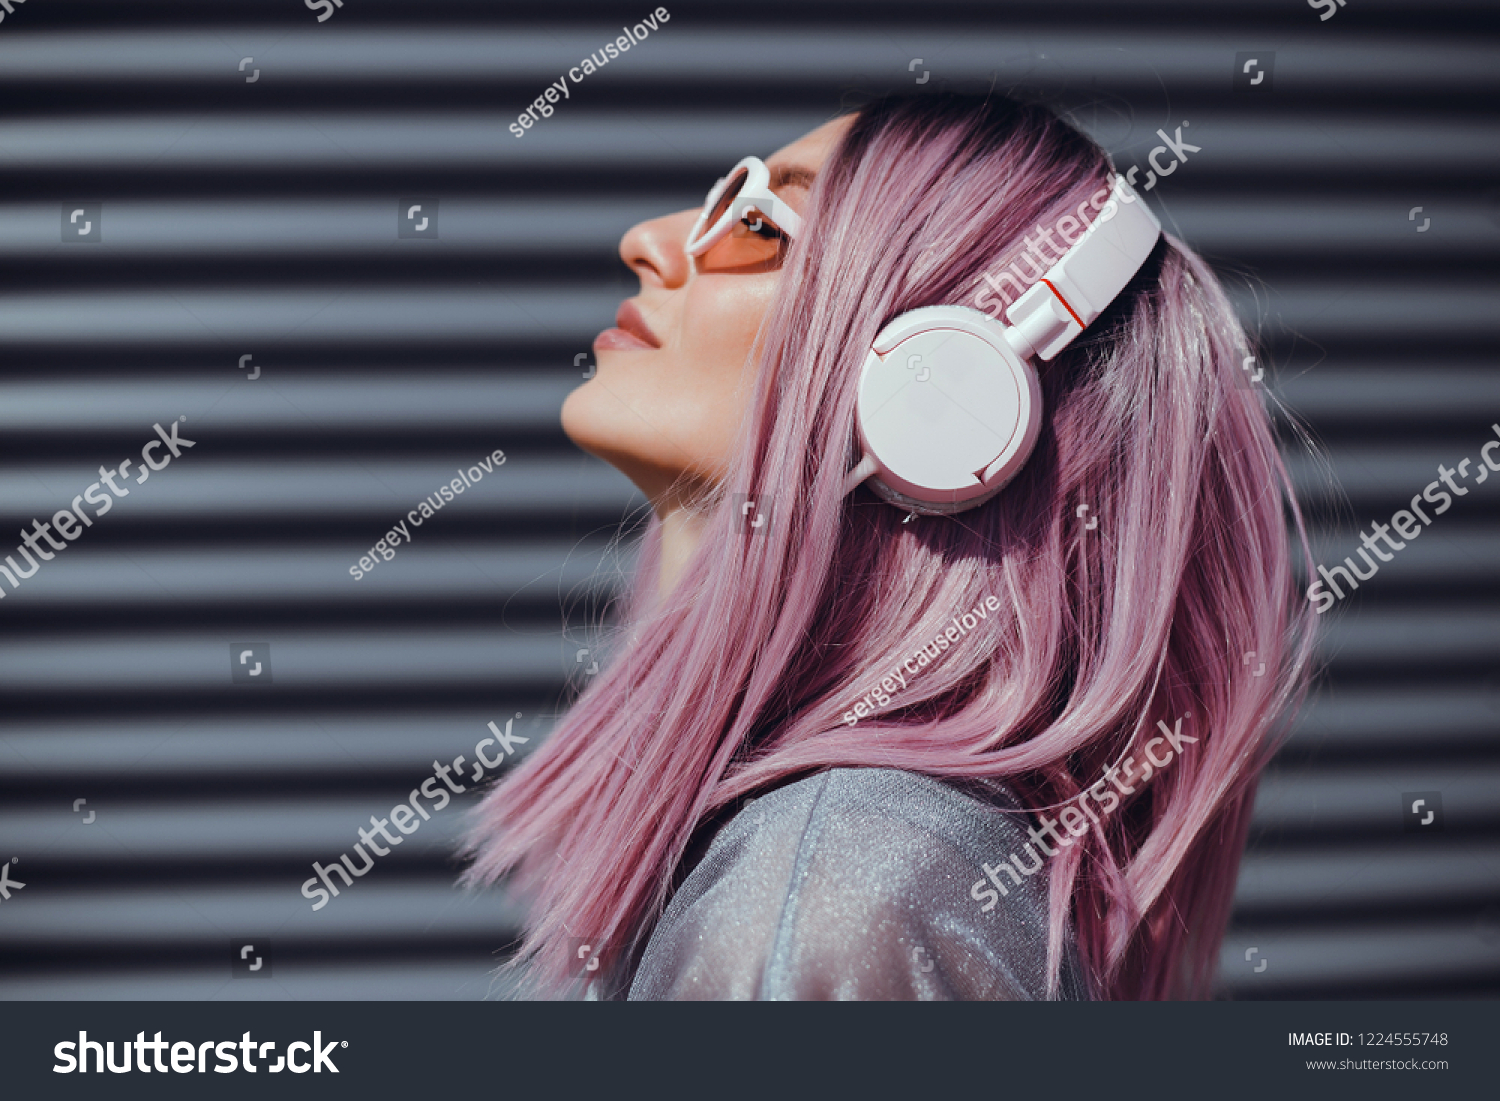 Beautiful young girl with purple pink hair listening to music on headphones, street style, outdoor portrait, hipster girl, music, mp3, Bali, beauty woman, sunglasses, orange color, concept #1224555748